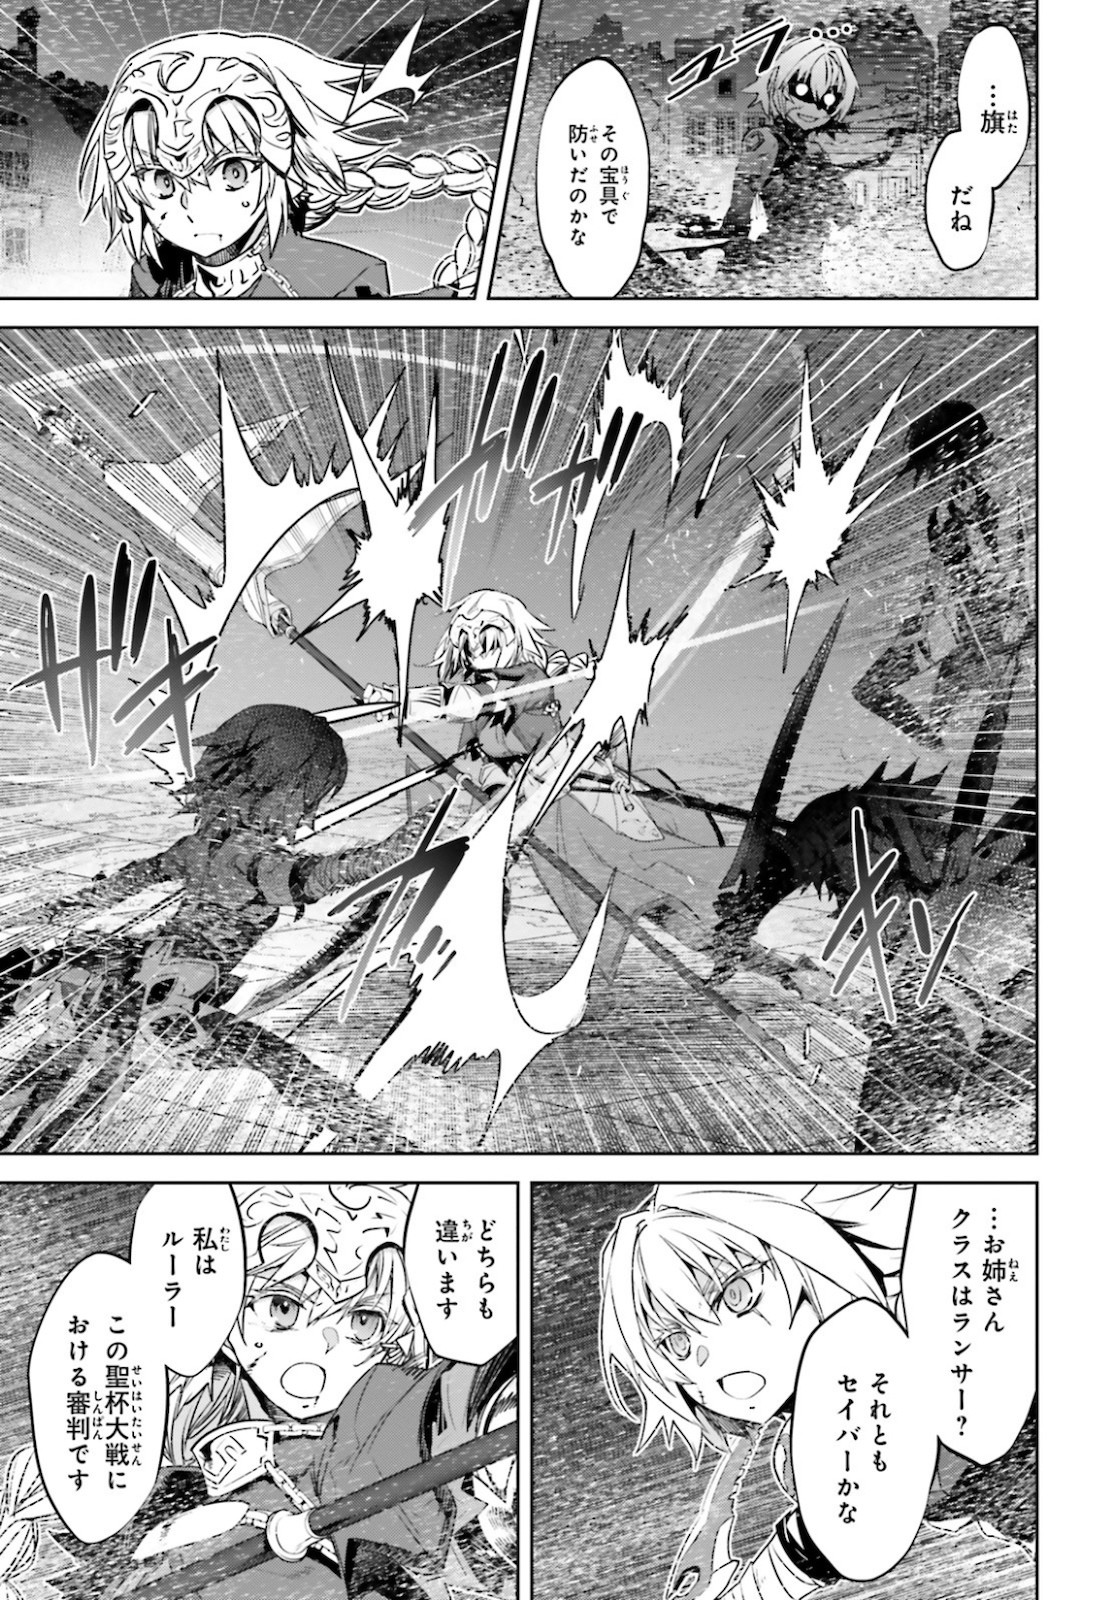 Fate-Apocrypha - Chapter 48 - Page 2